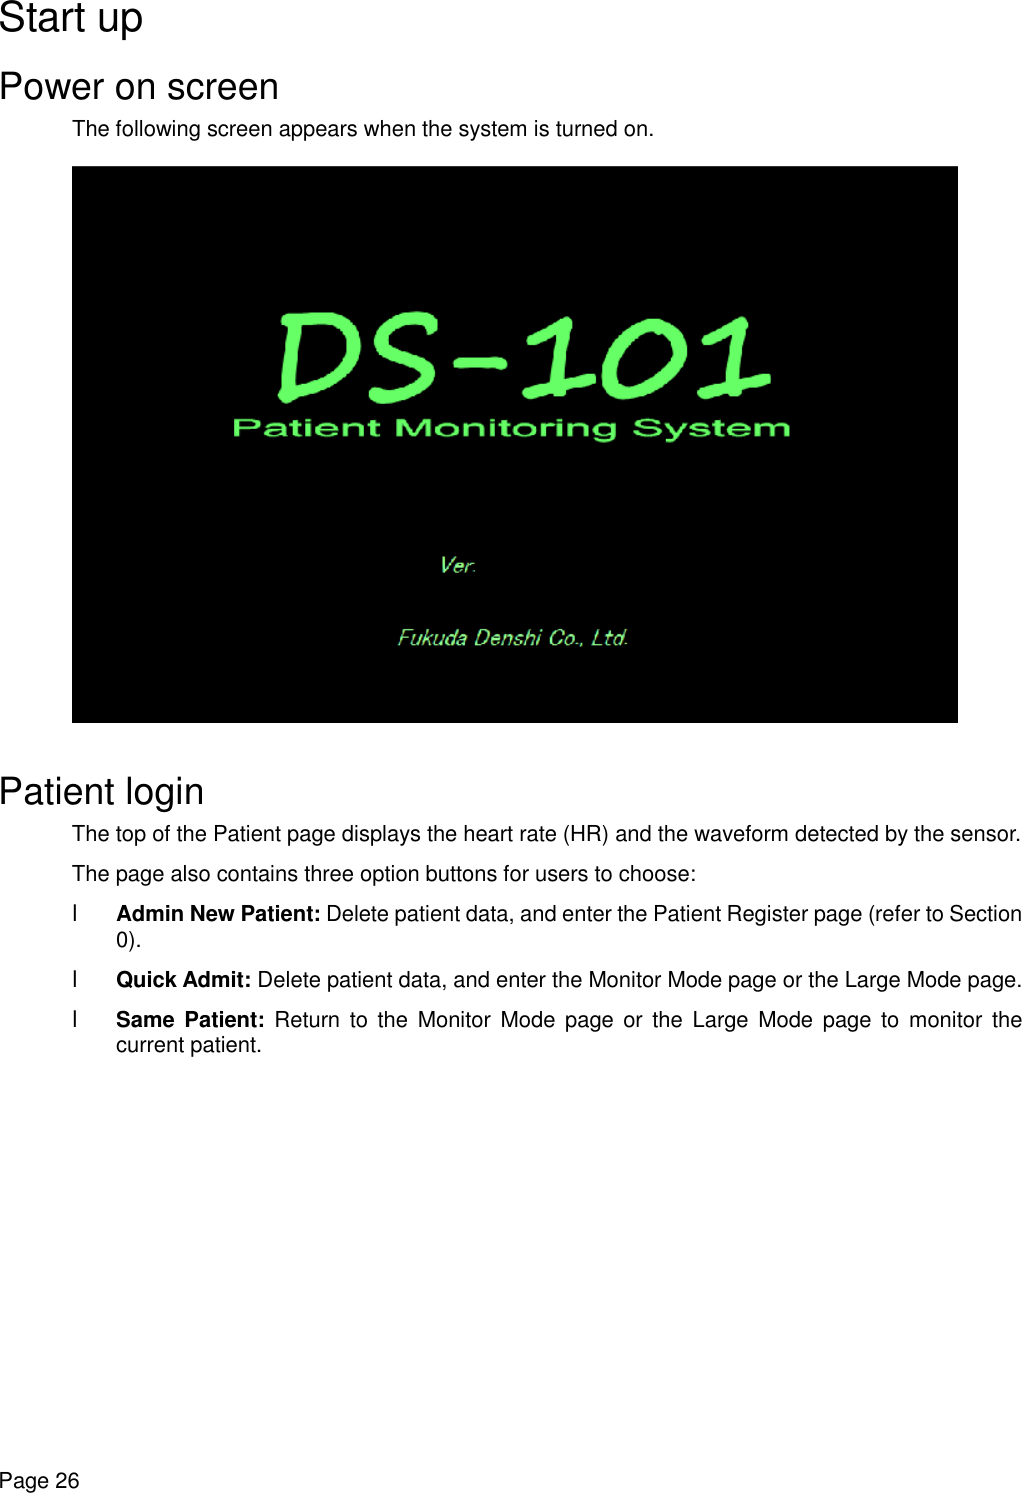    Page 26 Start up Power on screen The following screen appears when the system is turned on.     Patient login The top of the Patient page displays the heart rate (HR) and the waveform detected by the sensor. The page also contains three option buttons for users to choose: l Admin New Patient: Delete patient data, and enter the Patient Register page (refer to Section 0).  l Quick Admit: Delete patient data, and enter the Monitor Mode page or the Large Mode page.  l Same Patient: Return to the Monitor Mode page or the Large Mode page to monitor the current patient.  